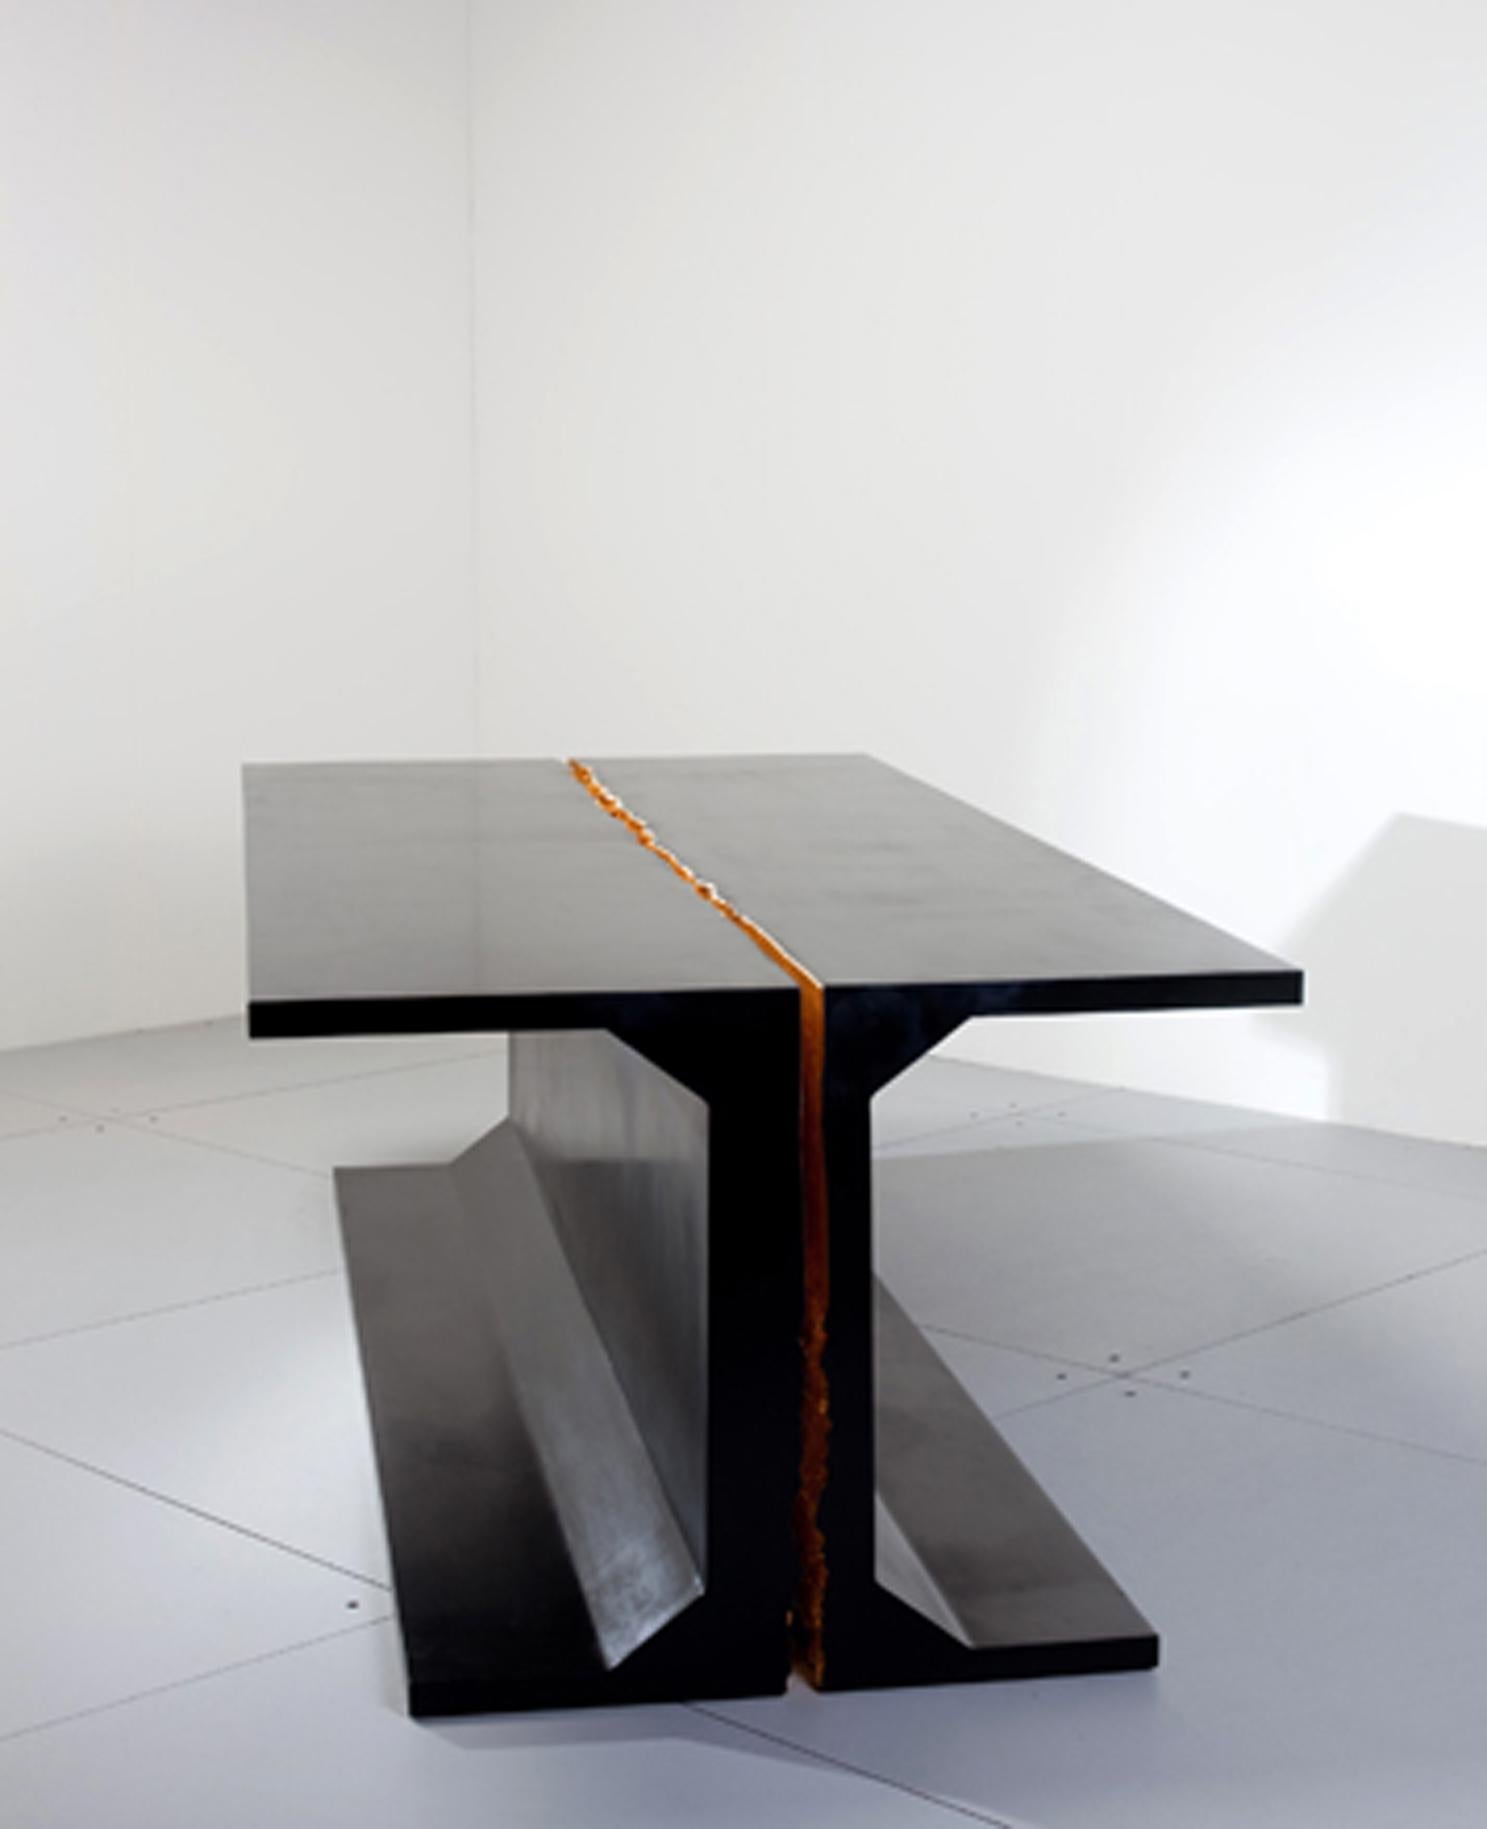 Unveiled in 2010 in collaboration with Carpenters Workshop Gallery, Thierry Dreyfus's Hommage Table is an elegant and intriguing table made of two mirroring parts. 